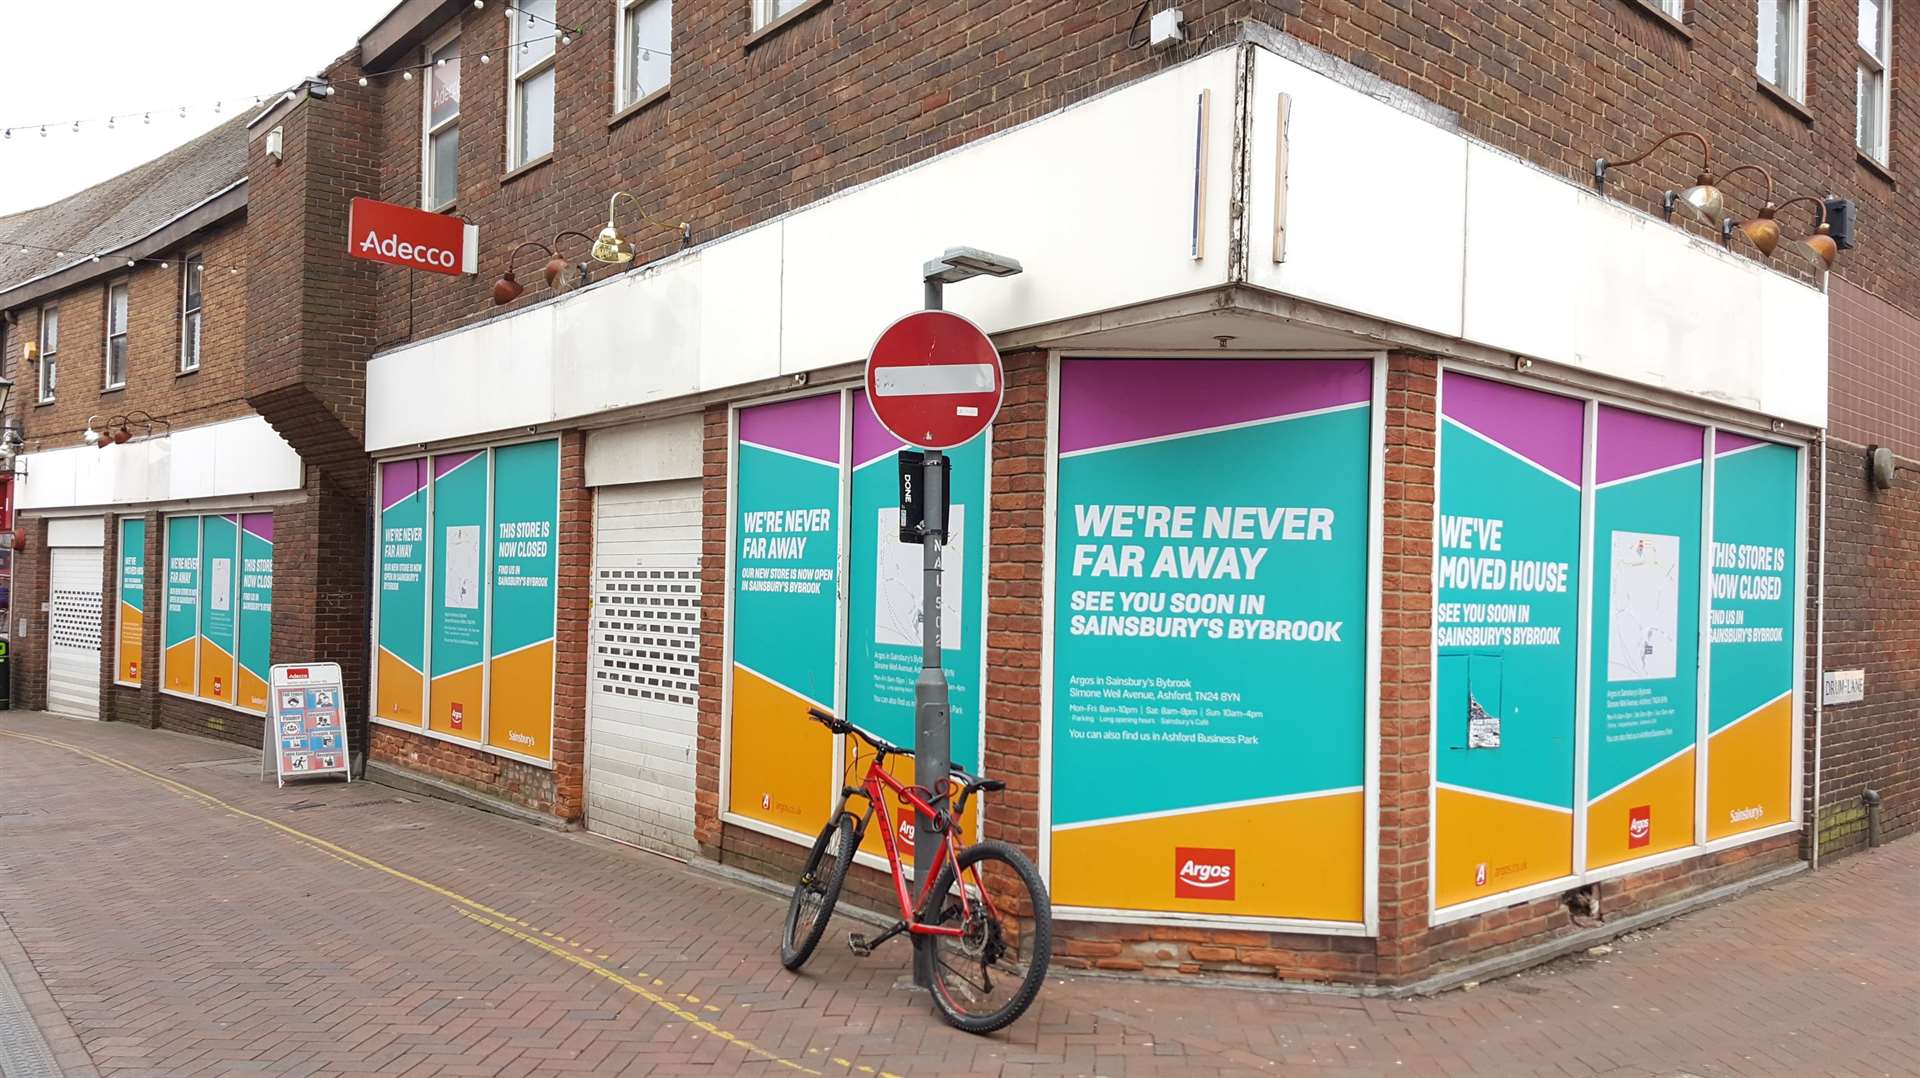 Argos closed its New Rents store in Ashford town centre in 2018